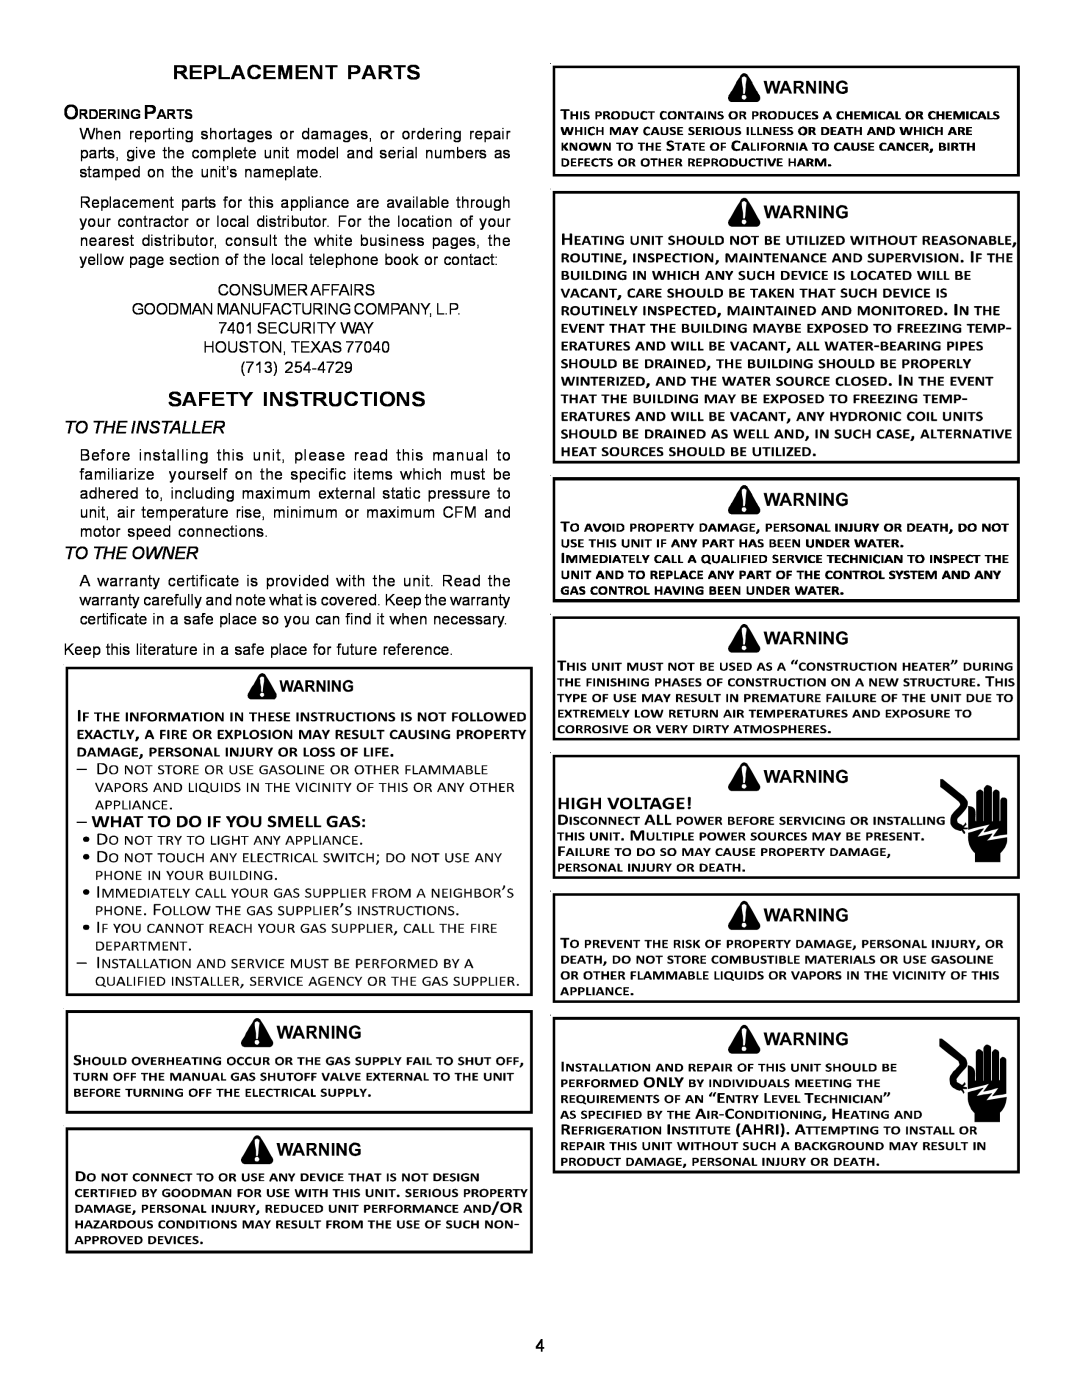 Goodman Mfg PG 15 specifications Replacement Parts, Safety Instructions, To The Installer, To The Owner 